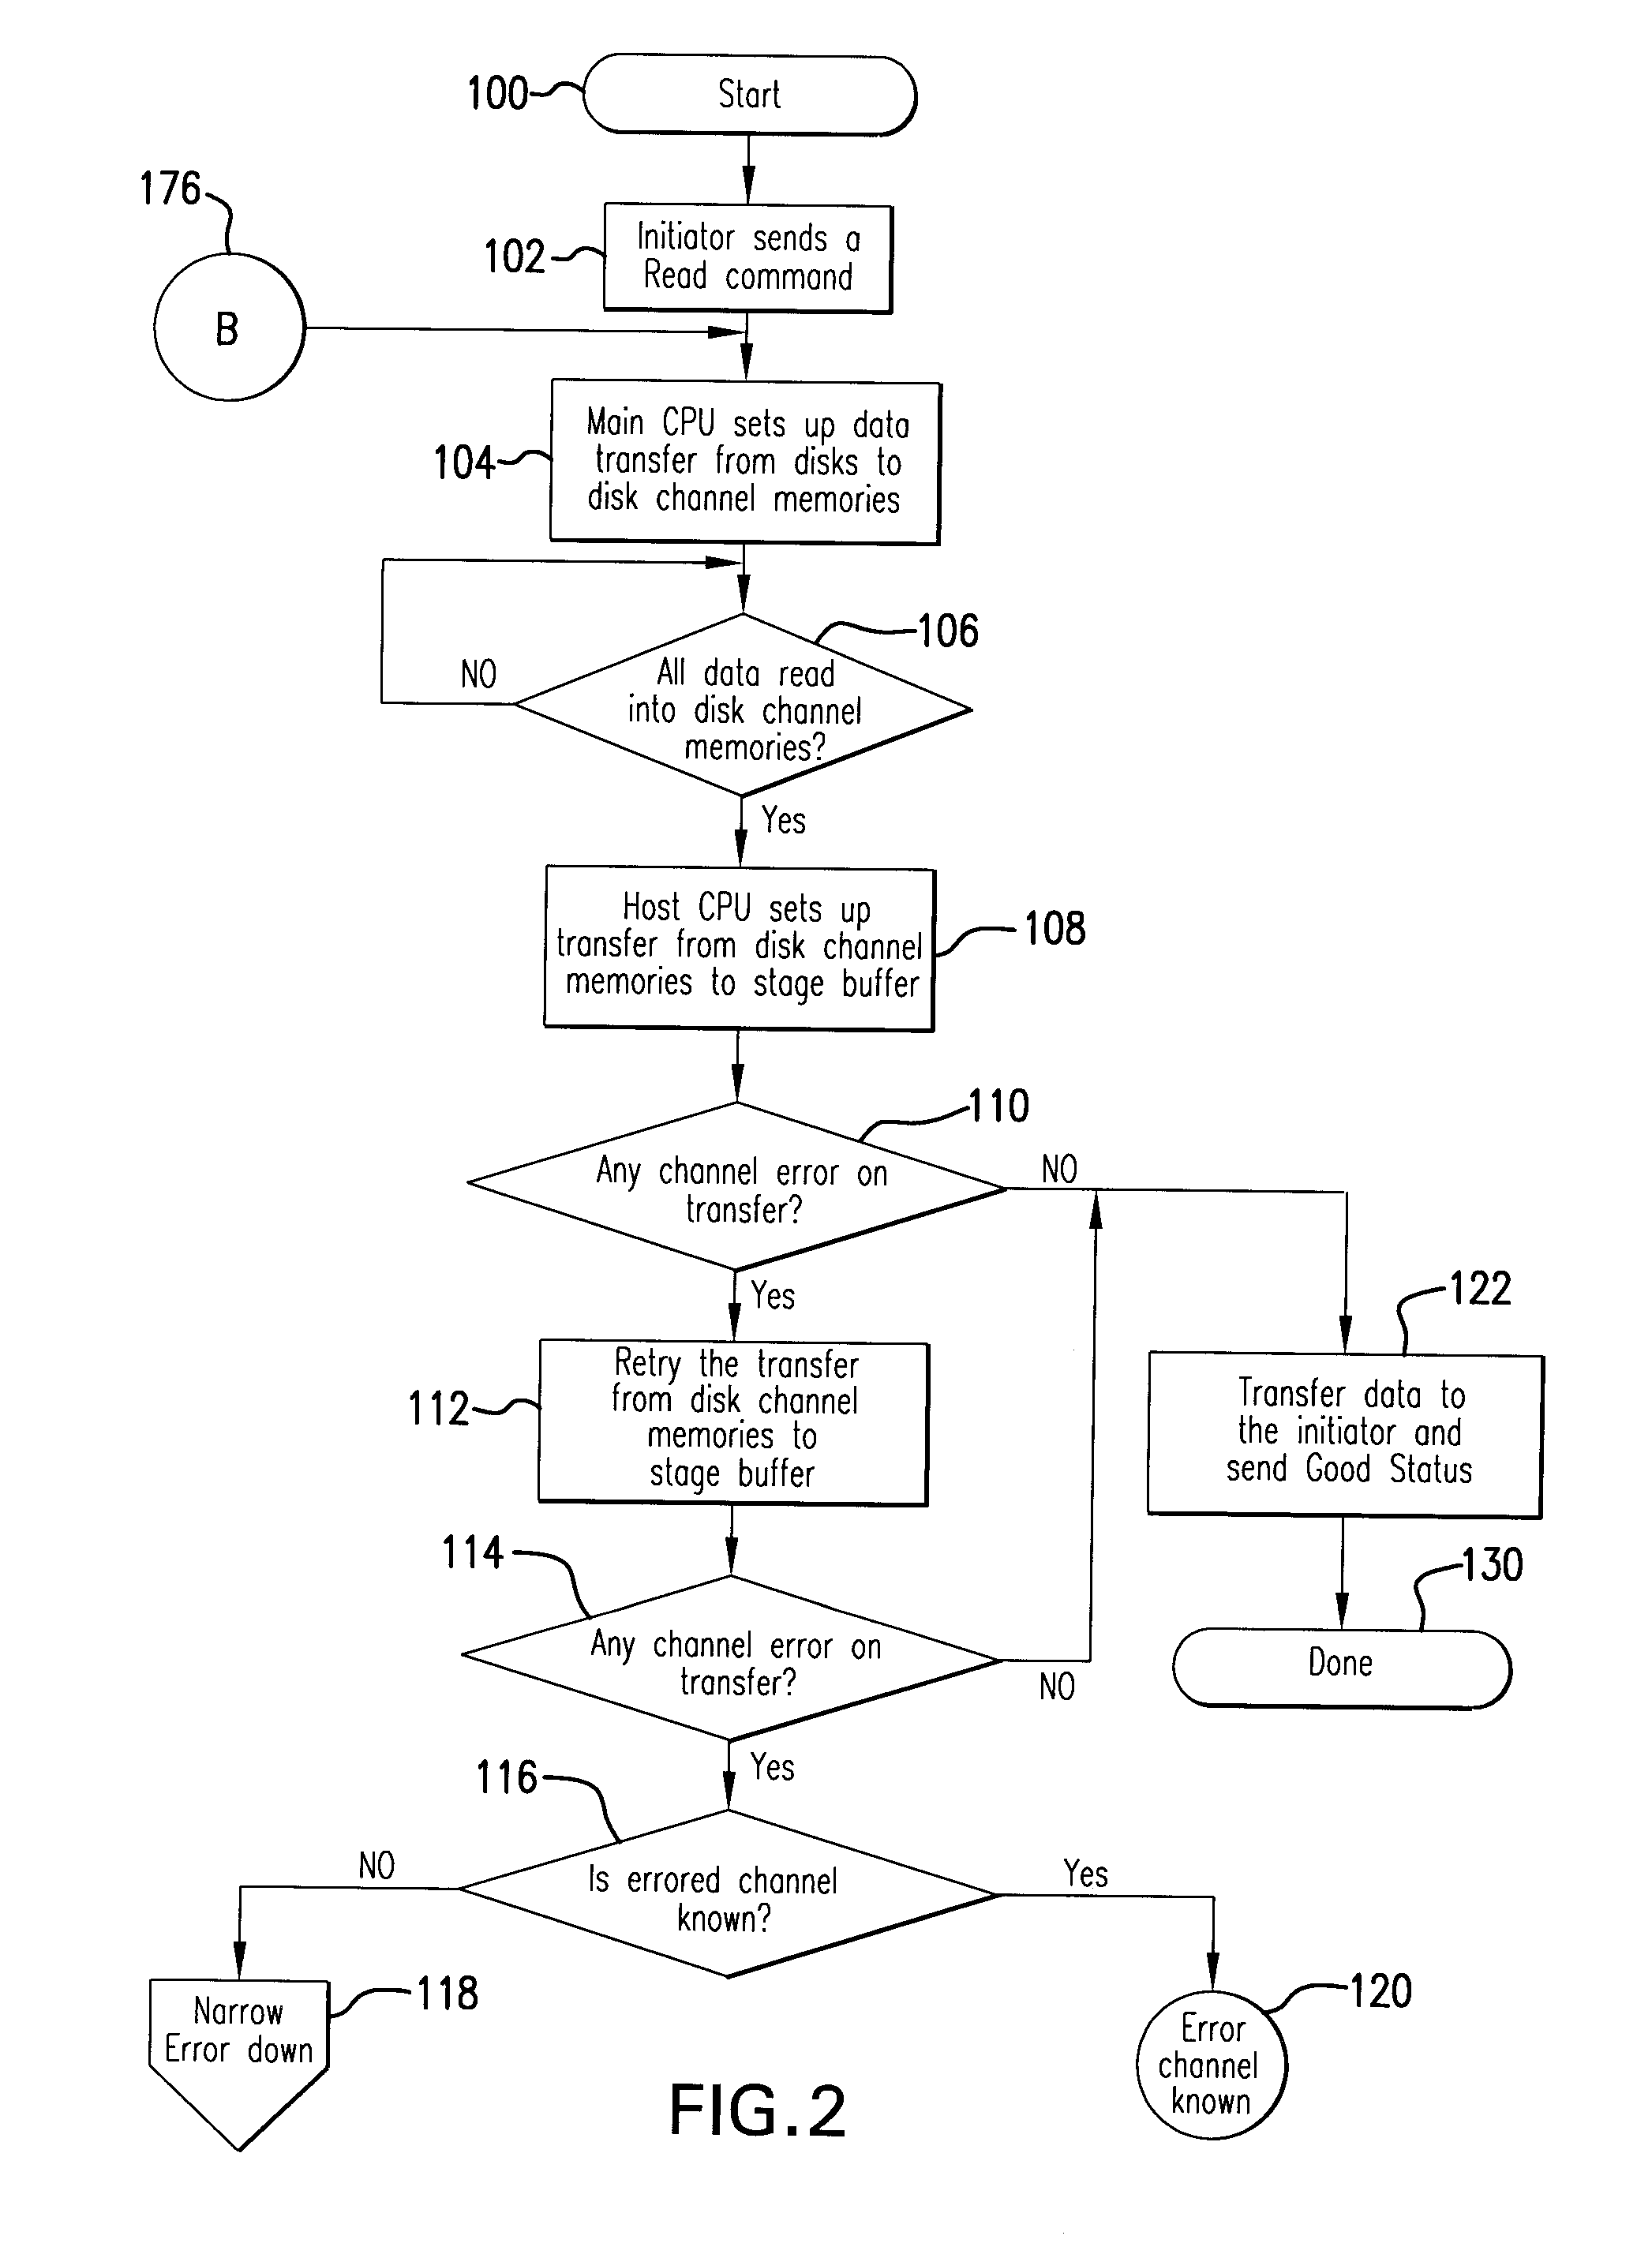 Method for auto-correction of errors in a raid memory system